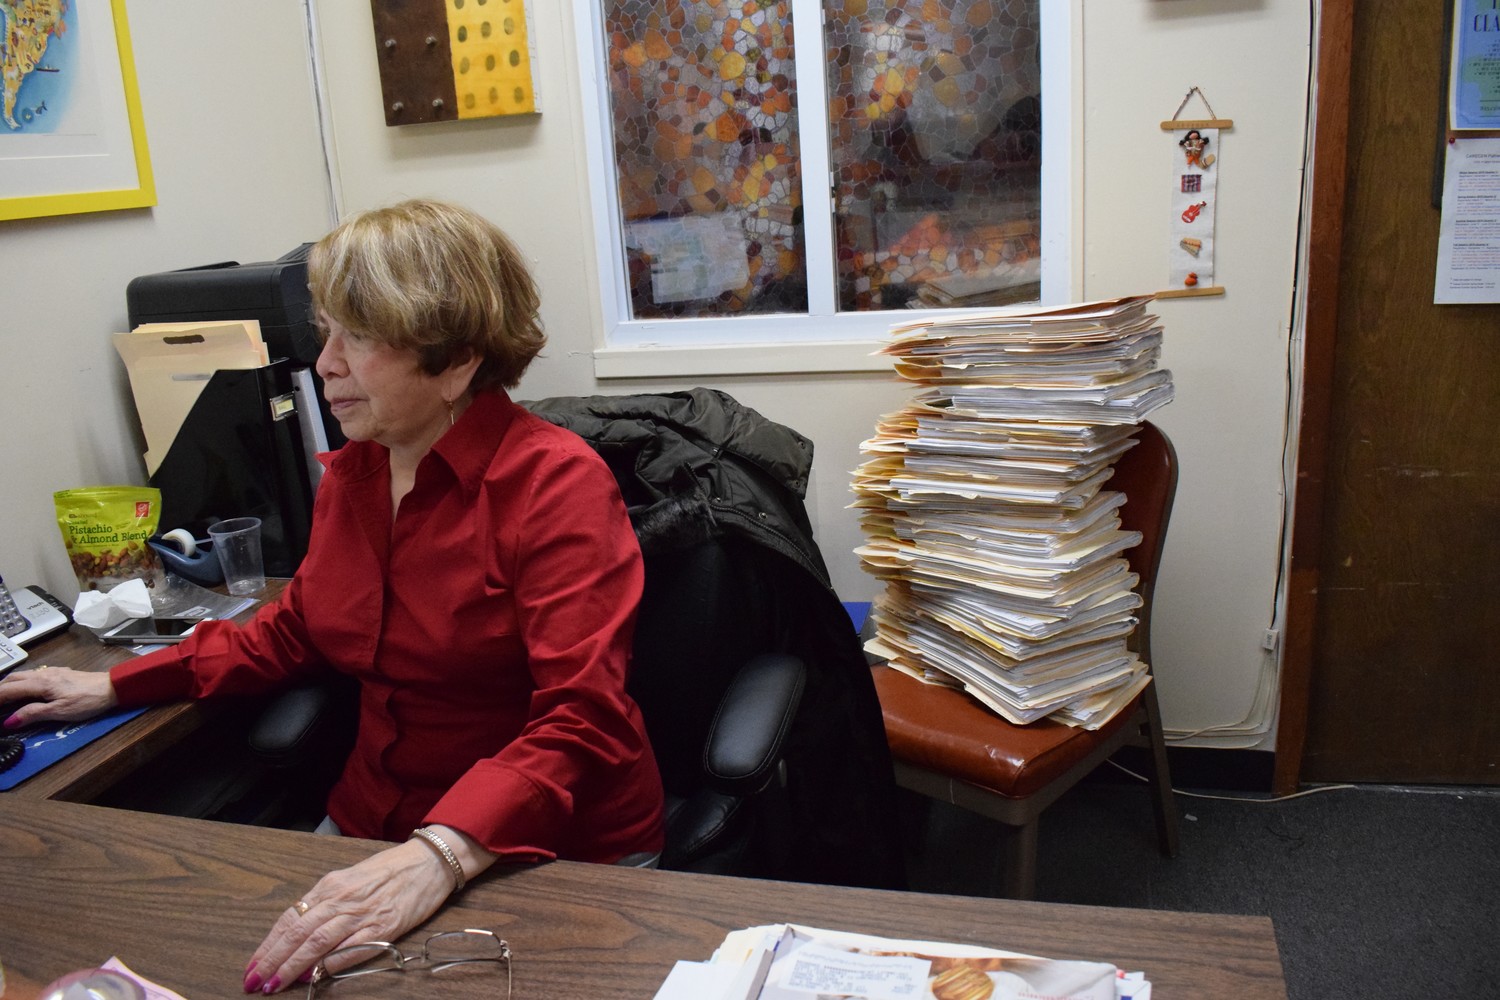 Mariann Mendoza, a volunteer receptionist and paralegal at the Central American Refugee Center in Hempstead, with a stack of TPS-related case files looming behind her.